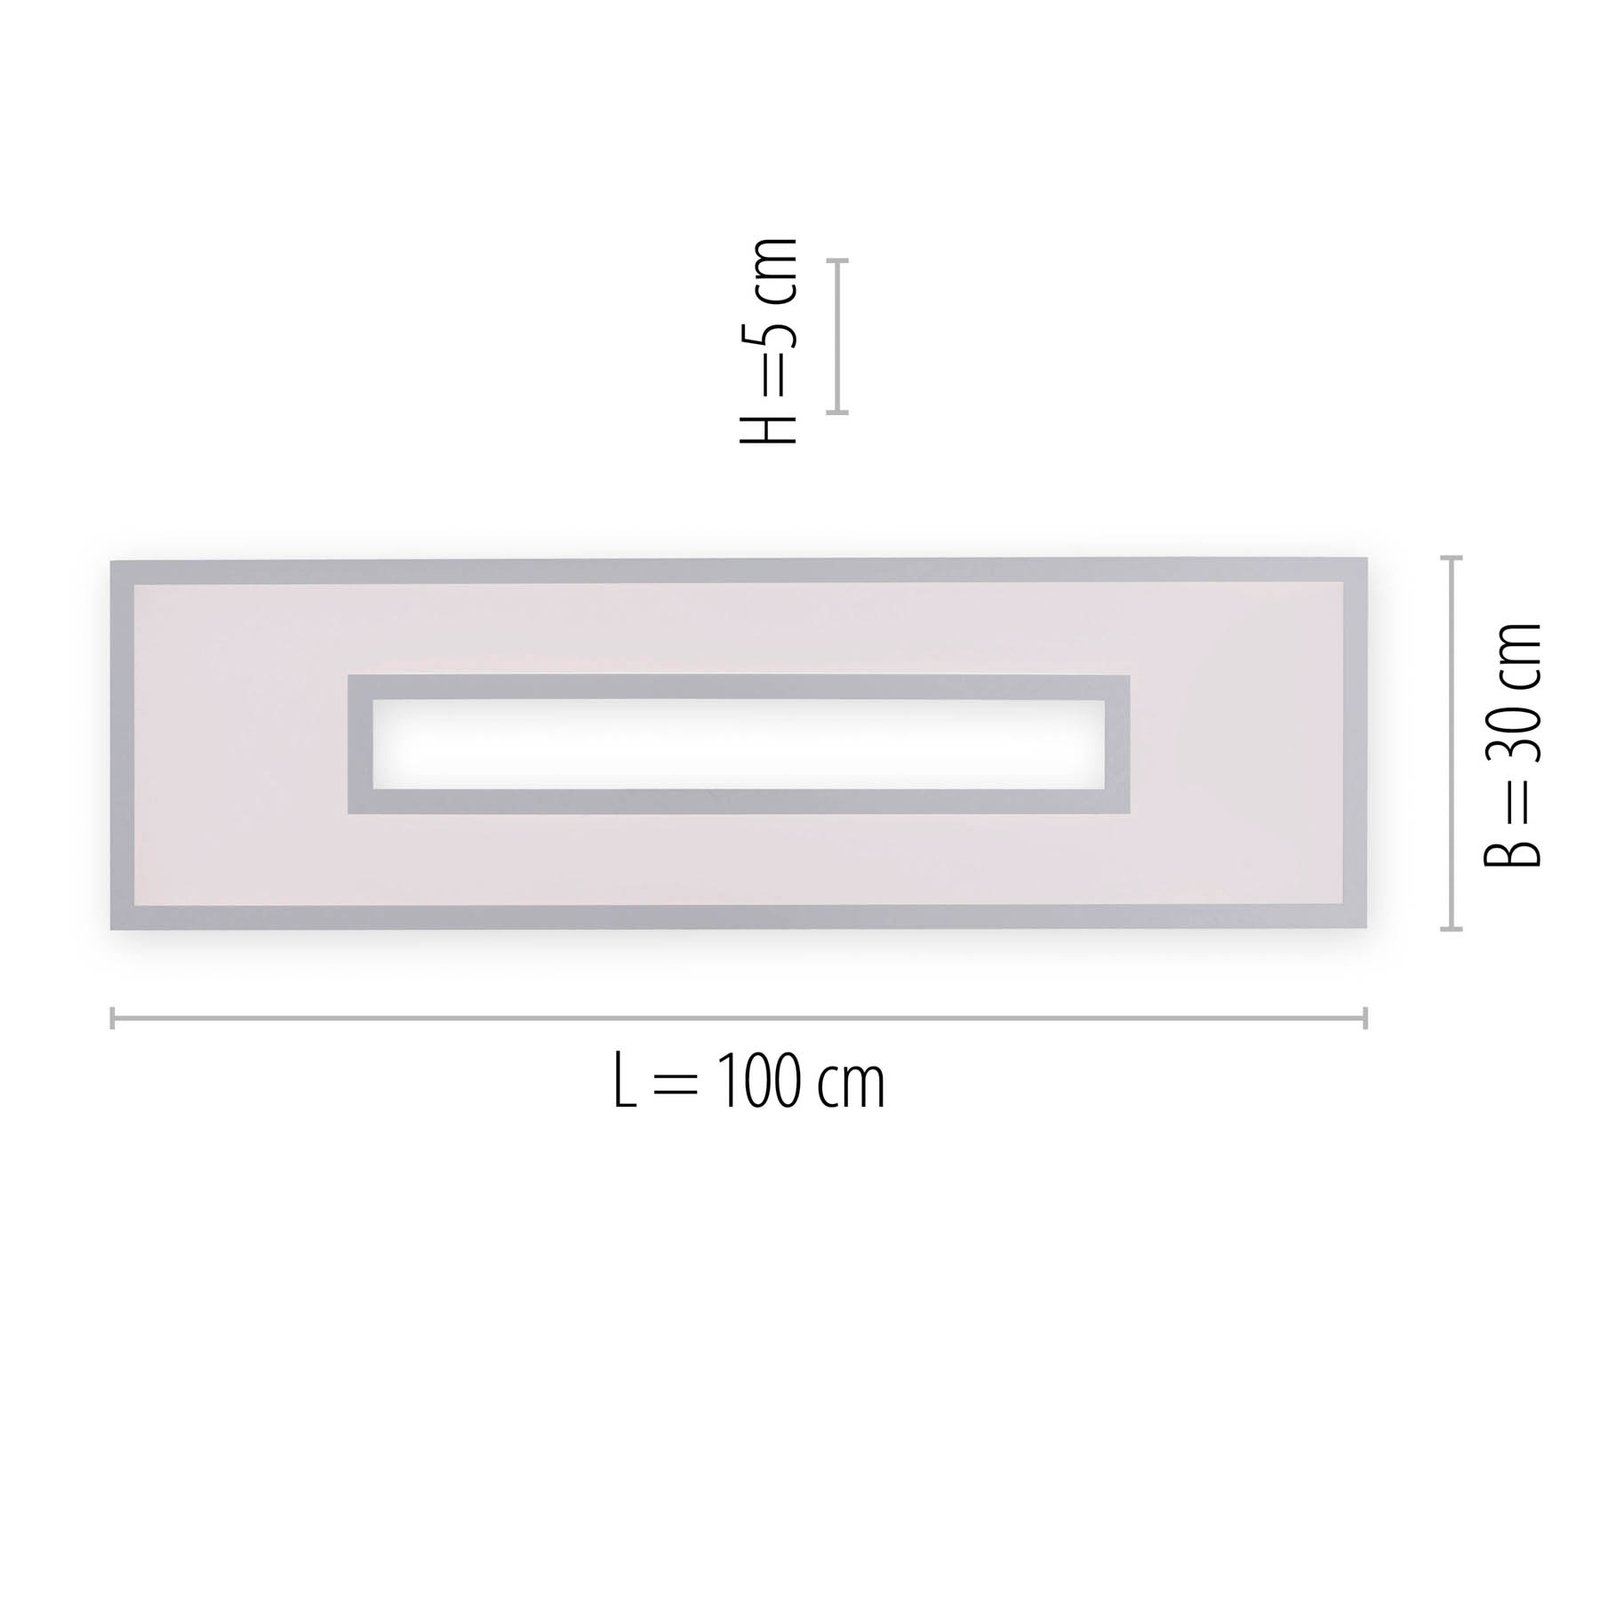 Plafonnier LED Recess rectangulaire, dimmable RGBW